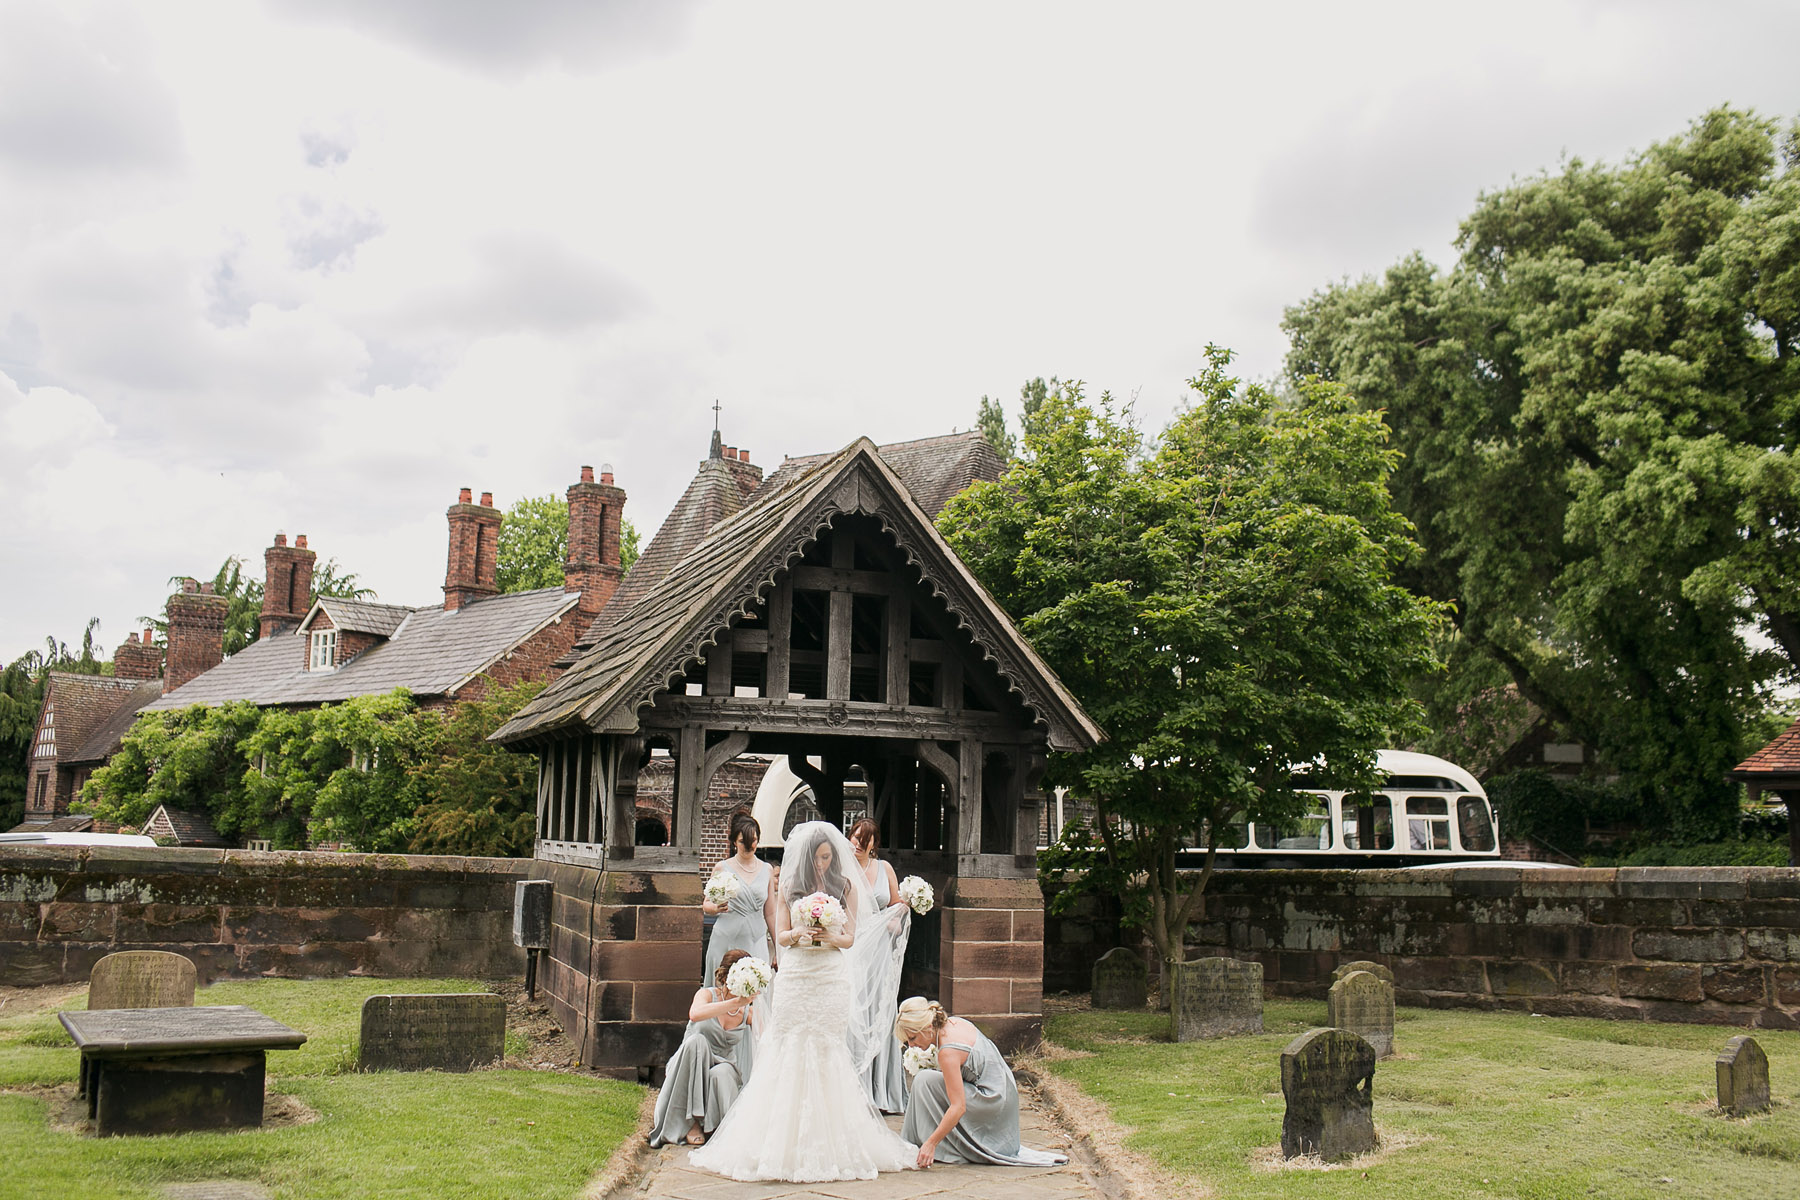 Holly and Nick's classic wedding at Capesthorne Hall in Cheshire